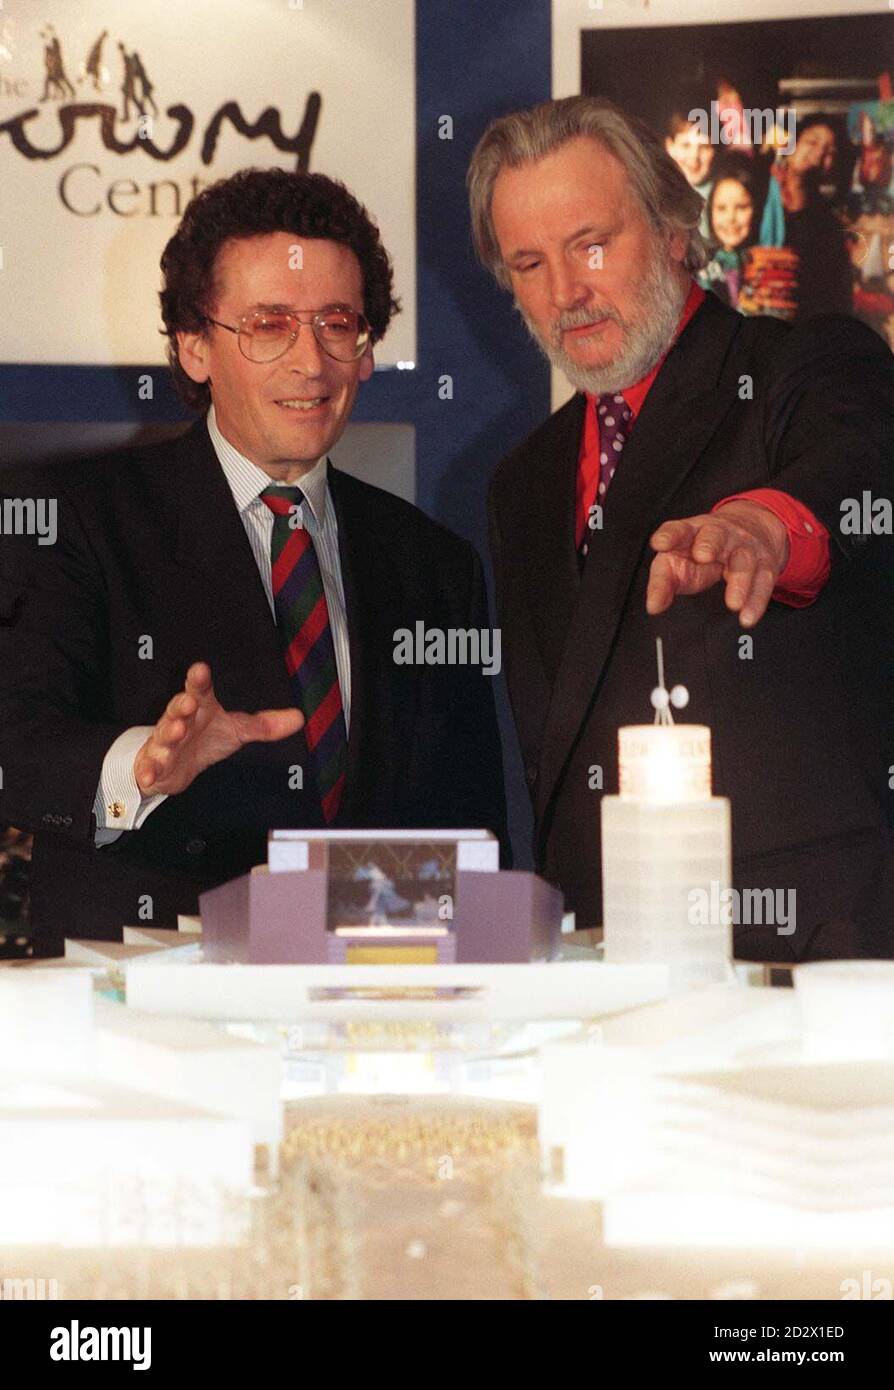 Architect Michael Wilford shows actor and Lowry patron Robert Powell a model of the proposed  127 million Lowry Centre unveiled in London today (Thursday). The new centre, to be built at Salford, Gtr Manchester, will be partly funded with  64 million from the lottery fund.  Stock Photo